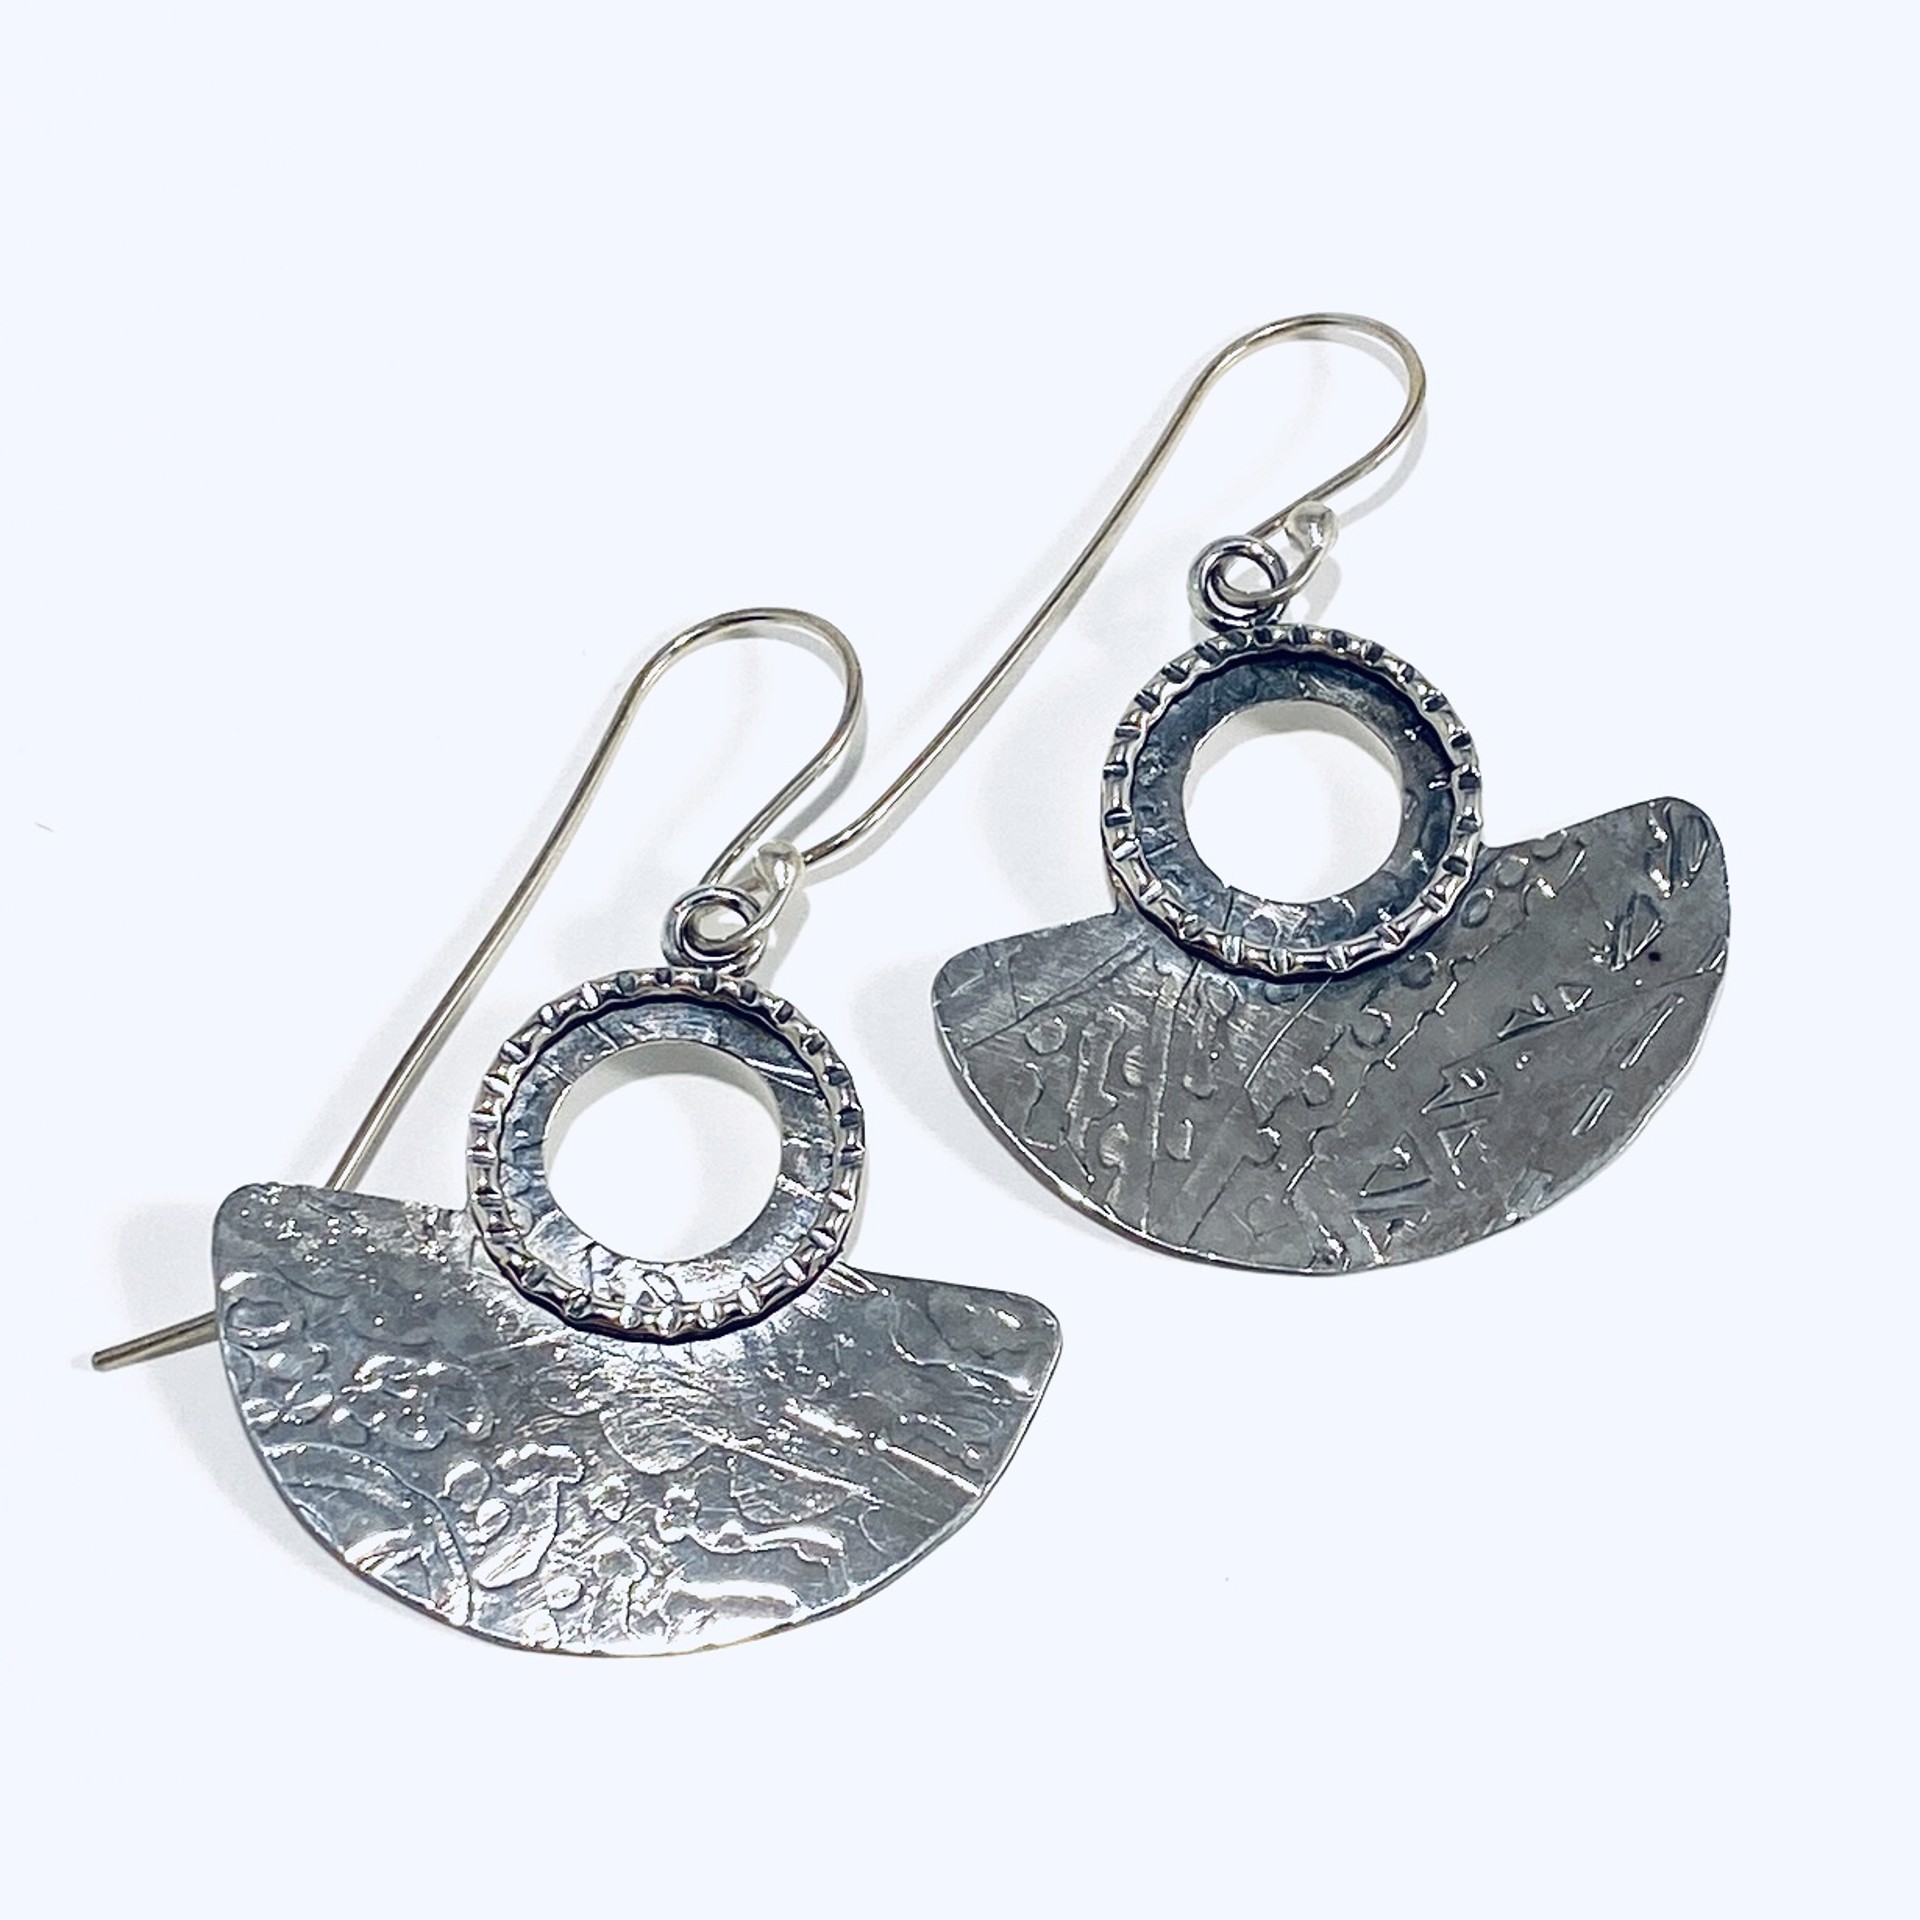 AB23-20 Earrings by Anne Bivens